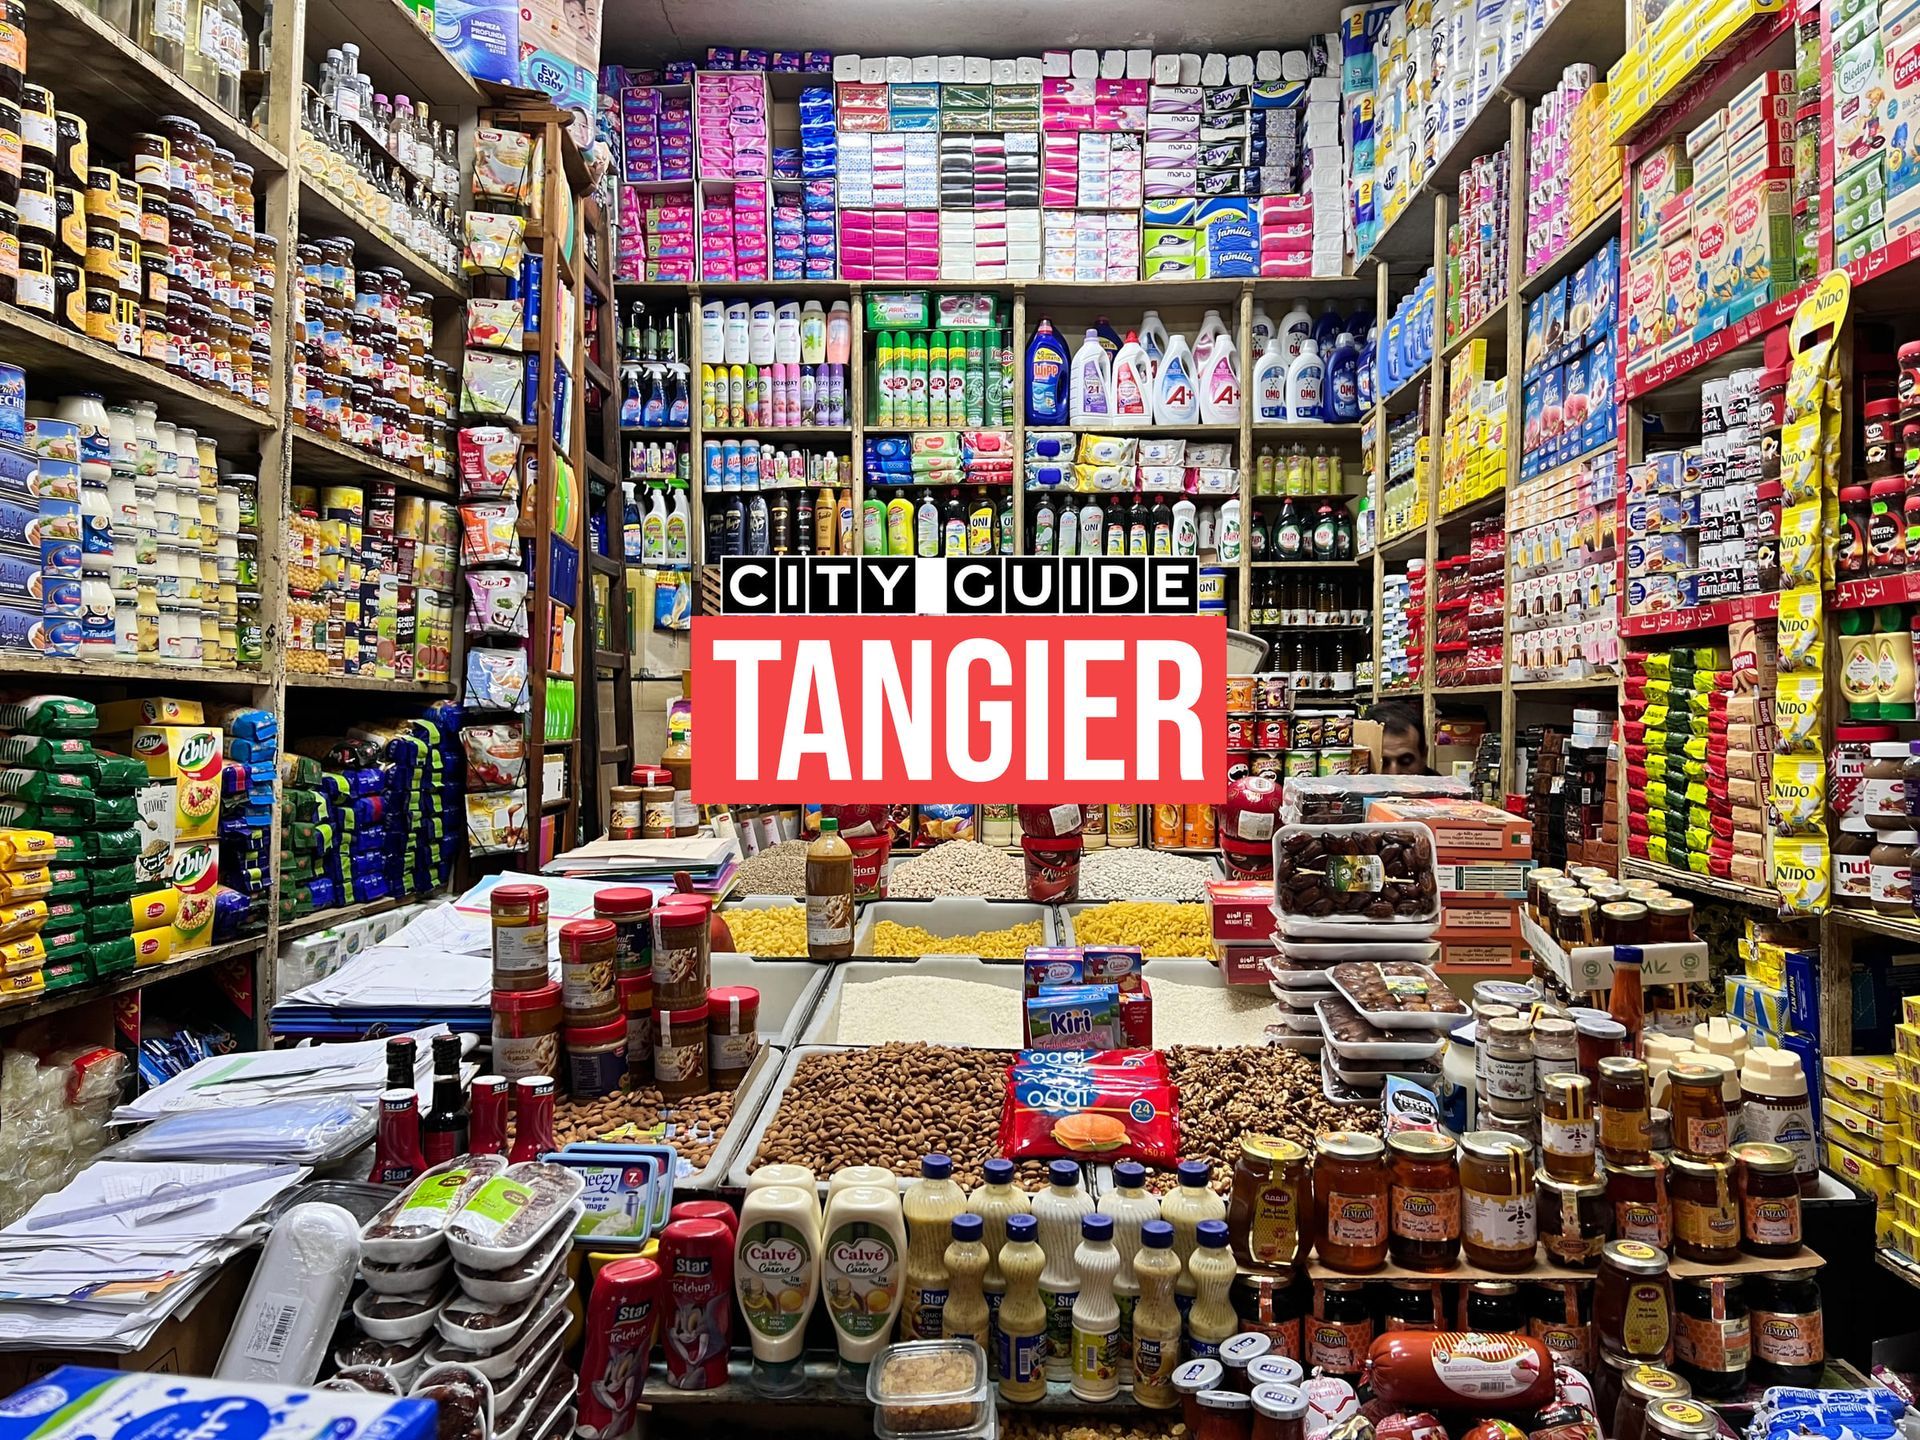 Tangier City Guide Image